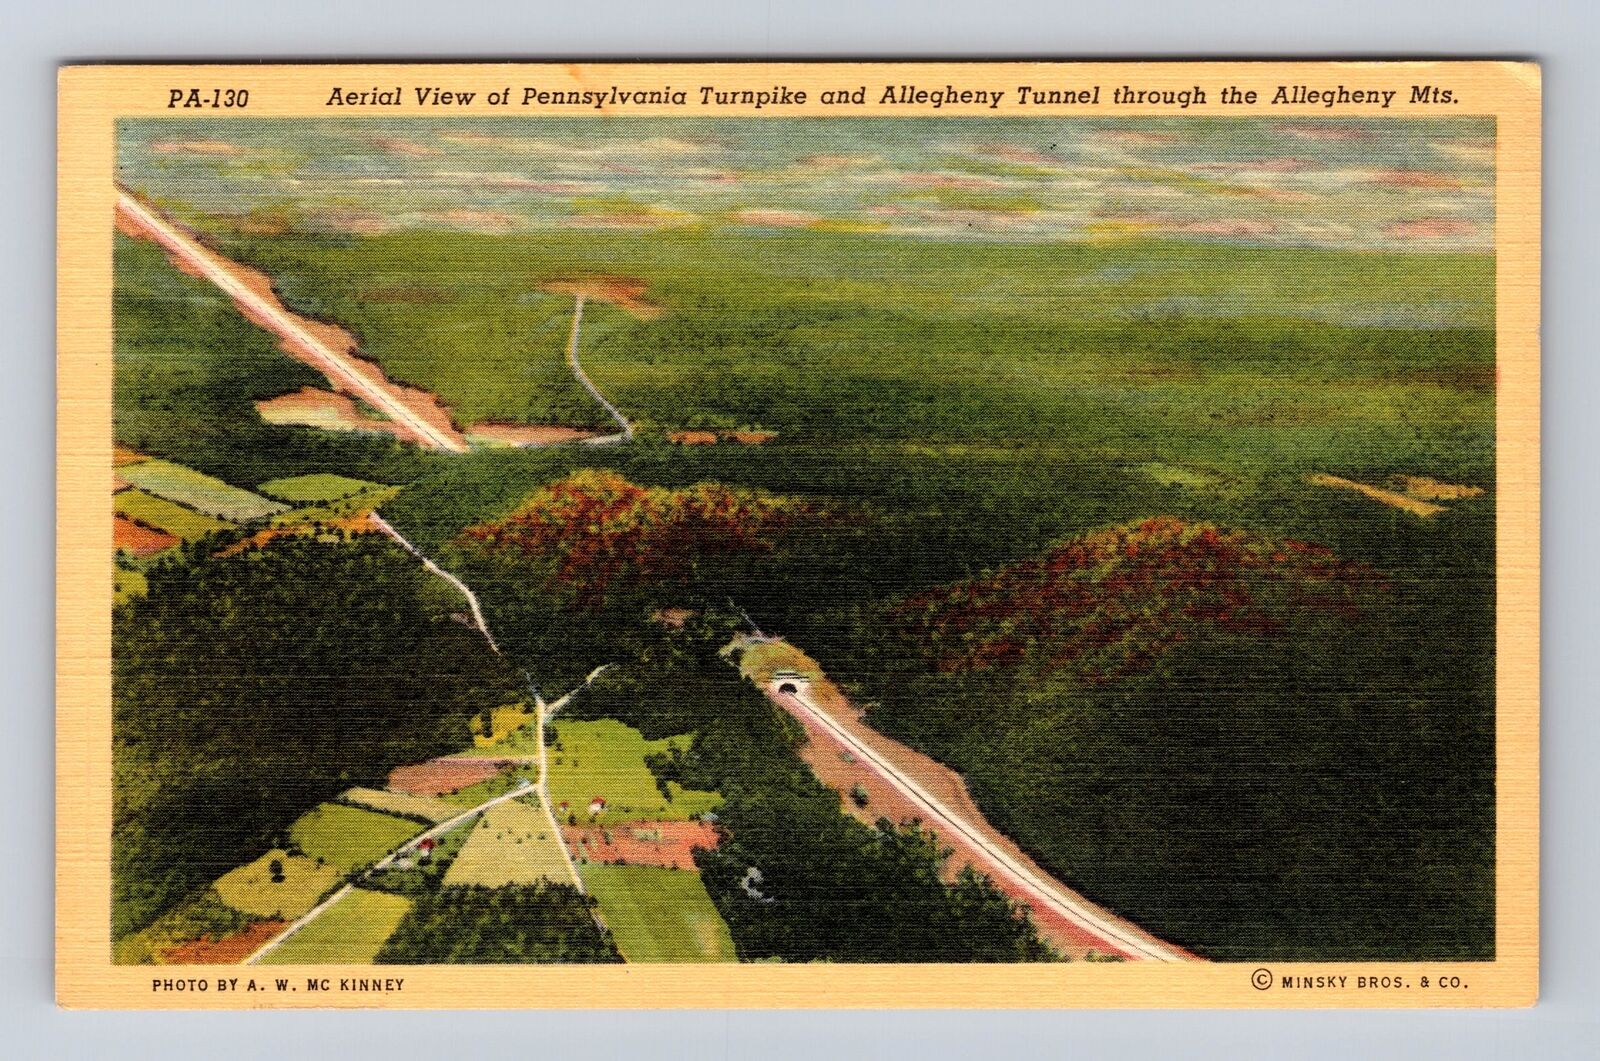 Allegheny Mts NY-New York, Aerial View Allegheny Tunnel, Vintage Postcard